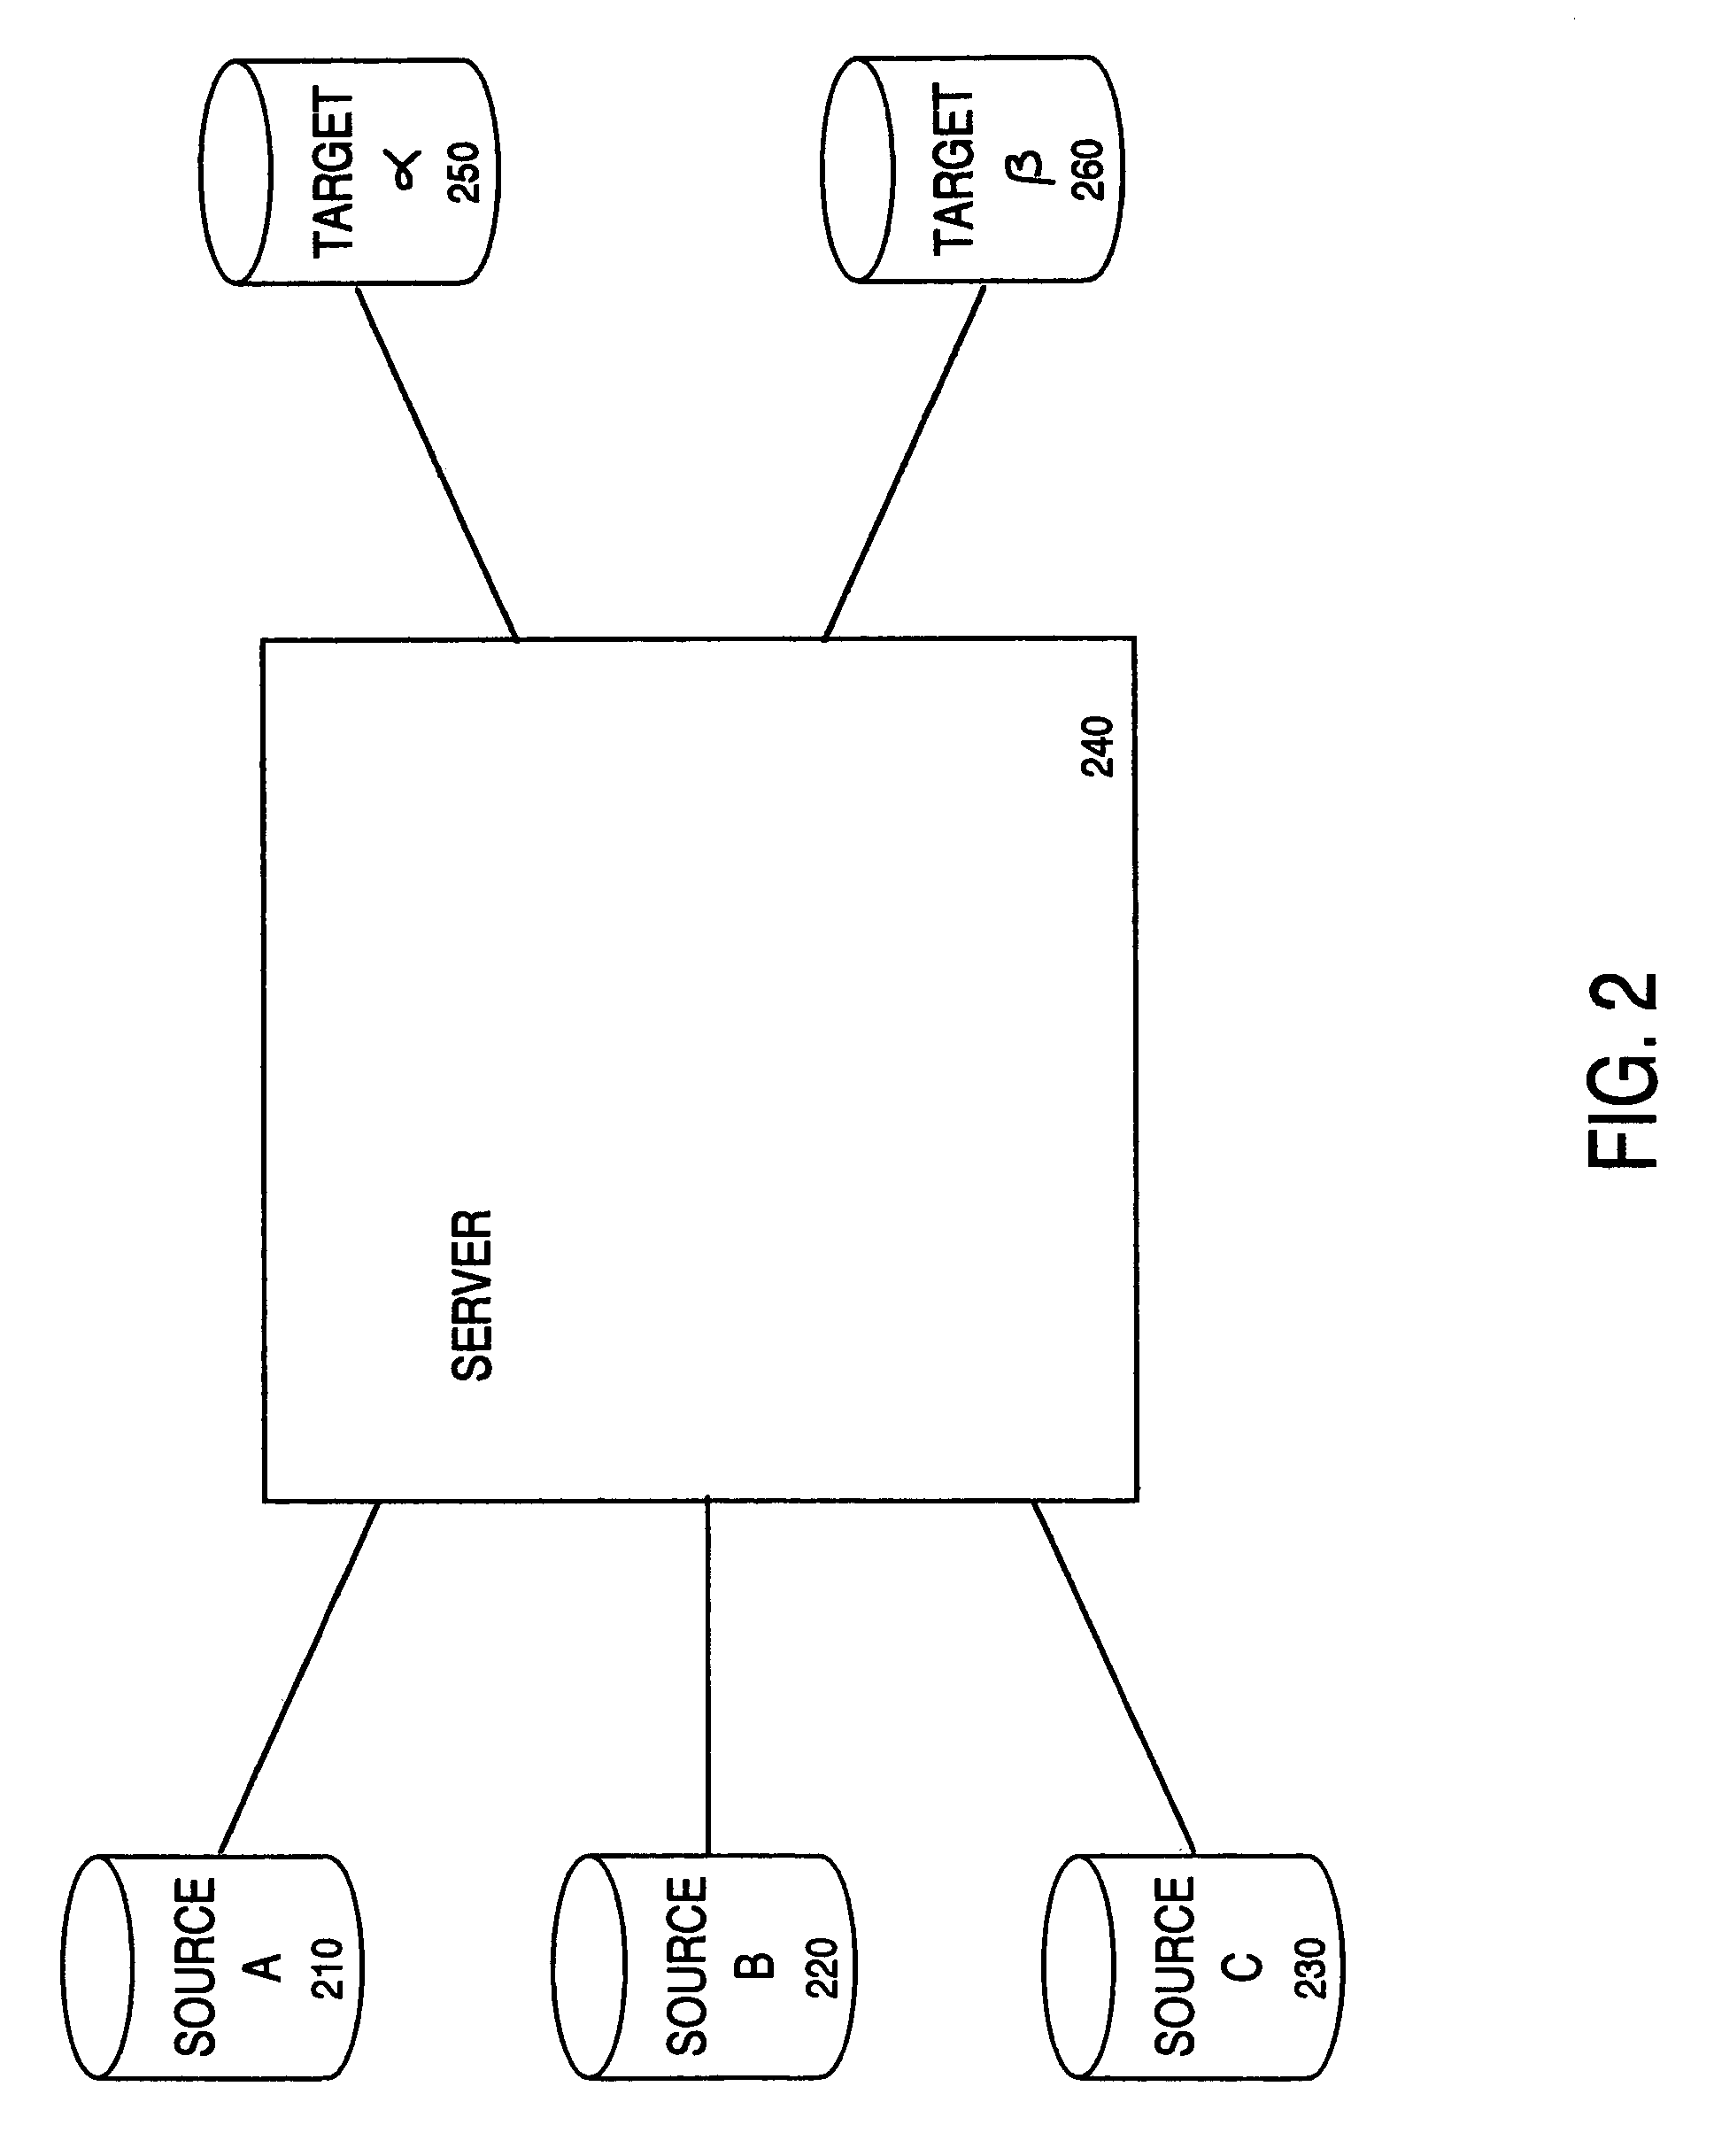 Method and apparatus for transporting data for data warehousing applications that incorporates analytic data interface